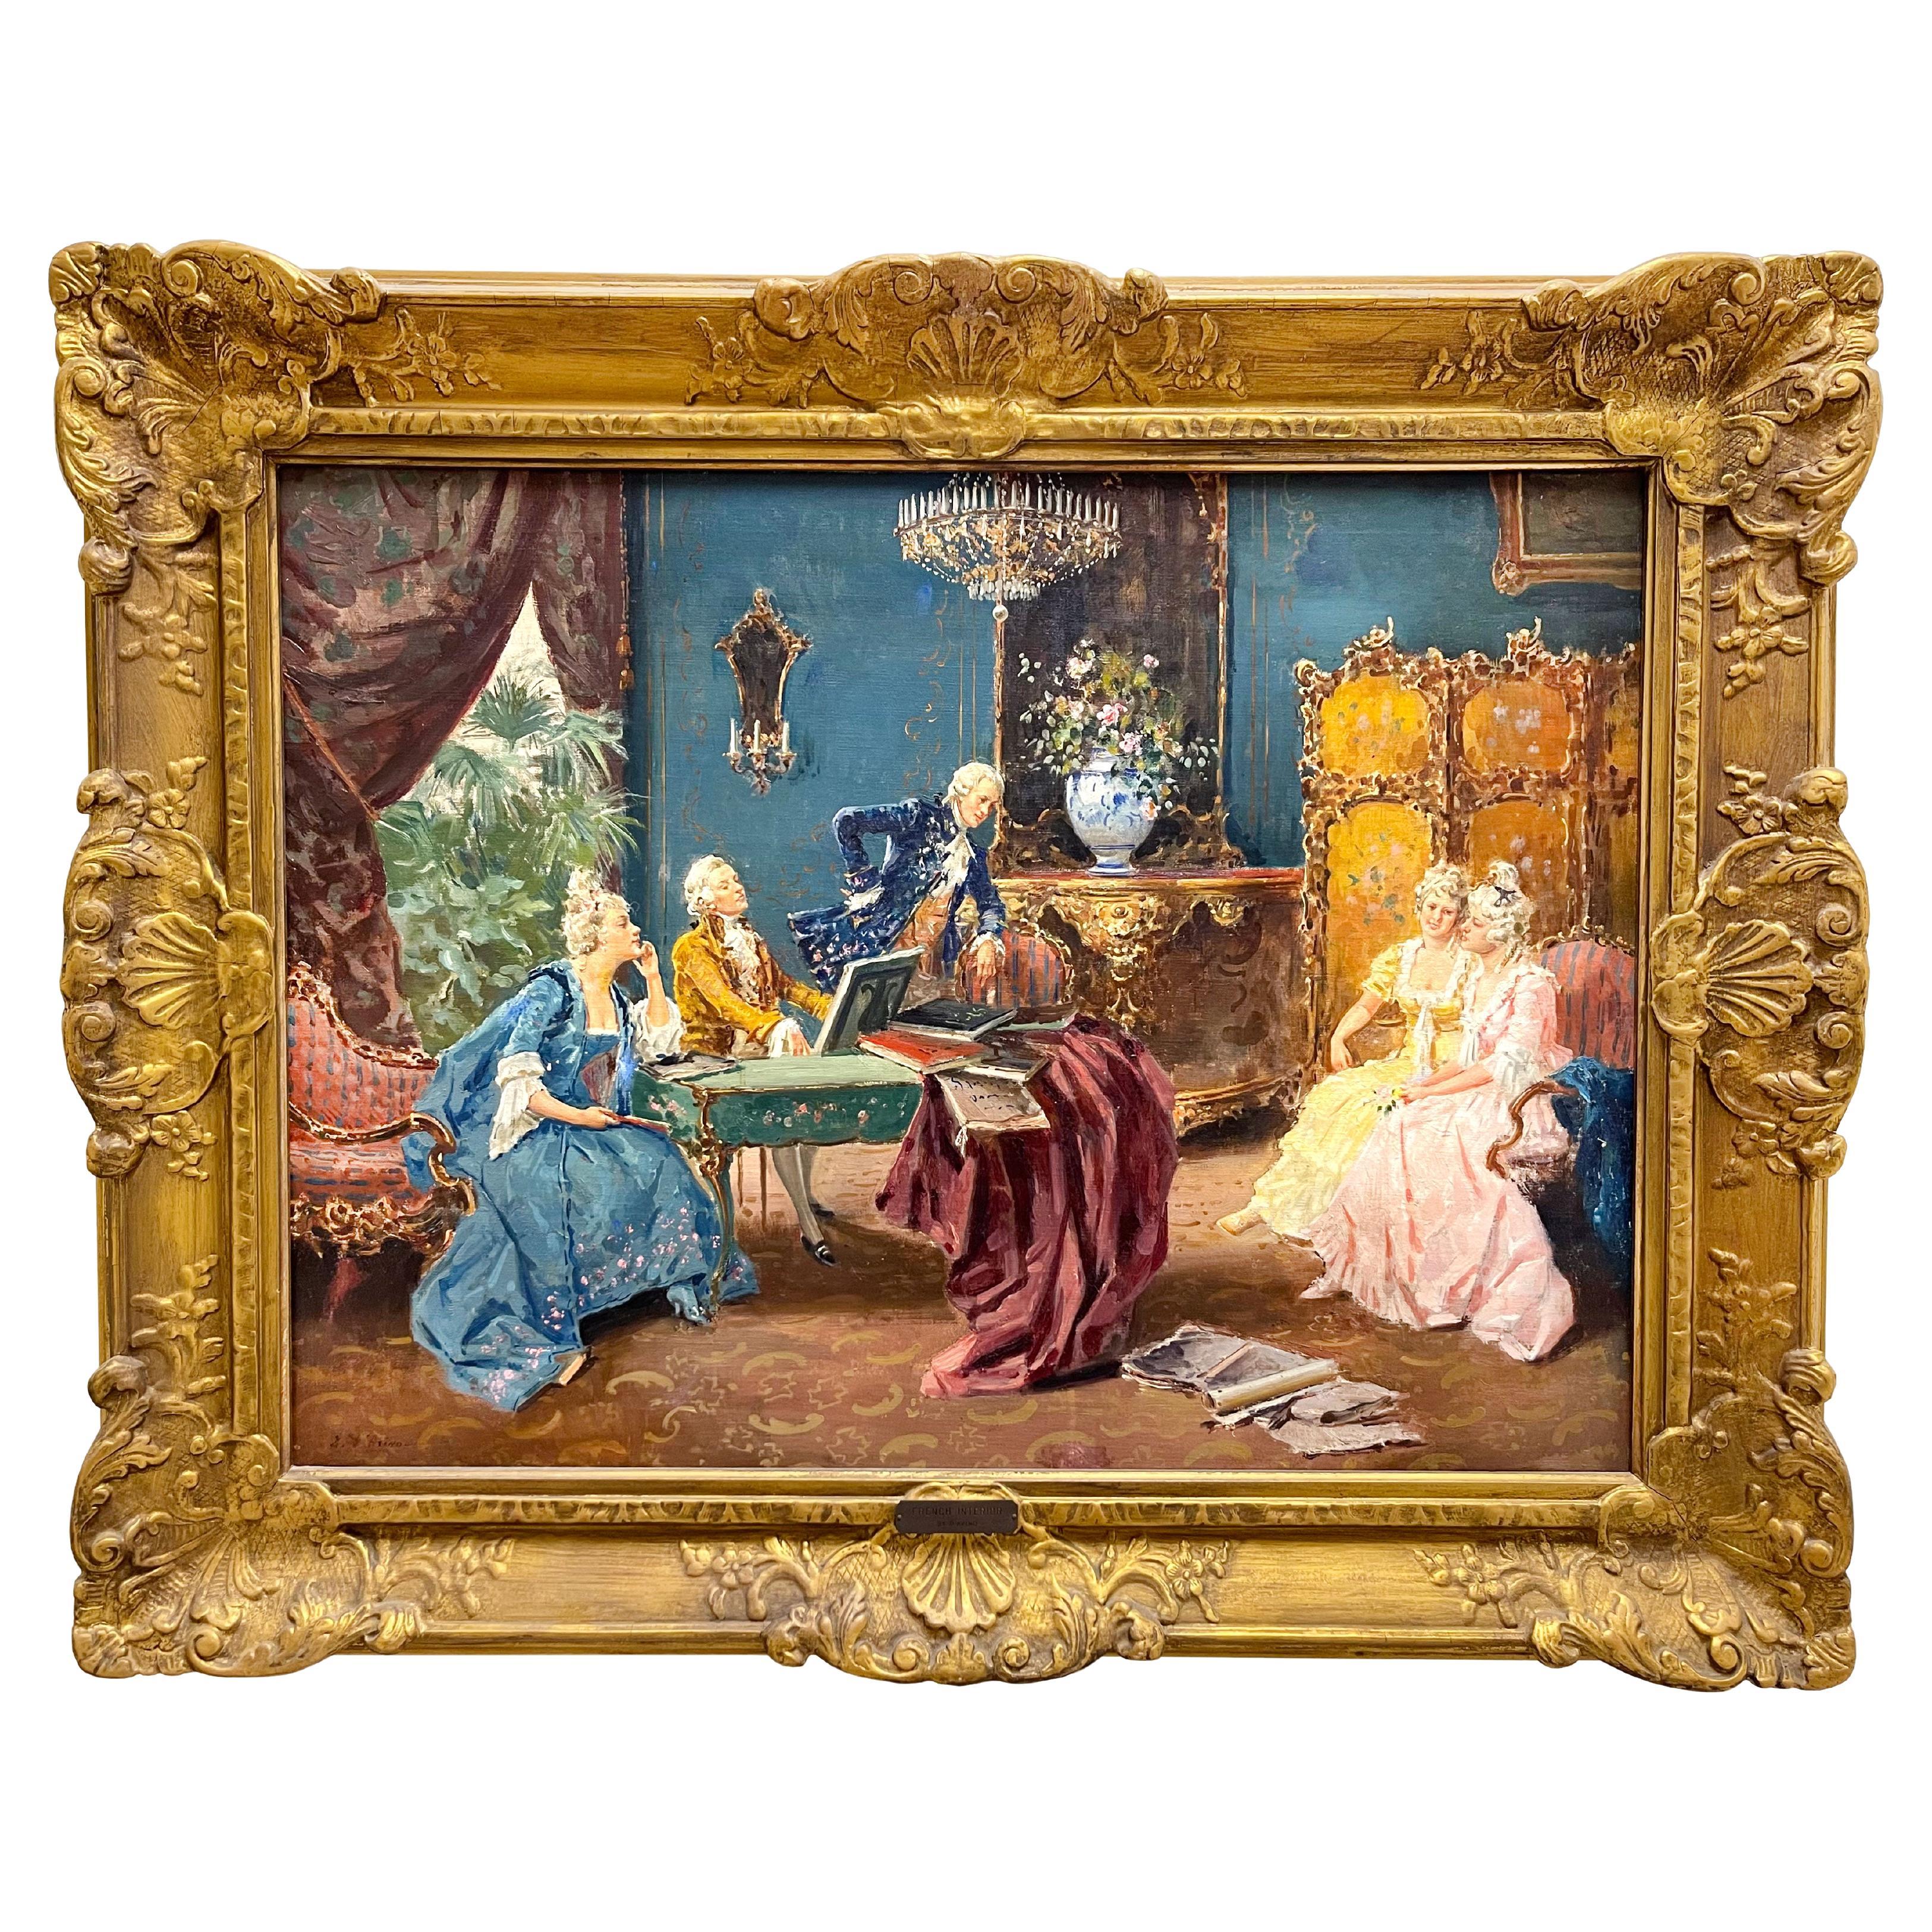 A French Oil On Canvas Painting Depicting a French Interior By E. D'avino